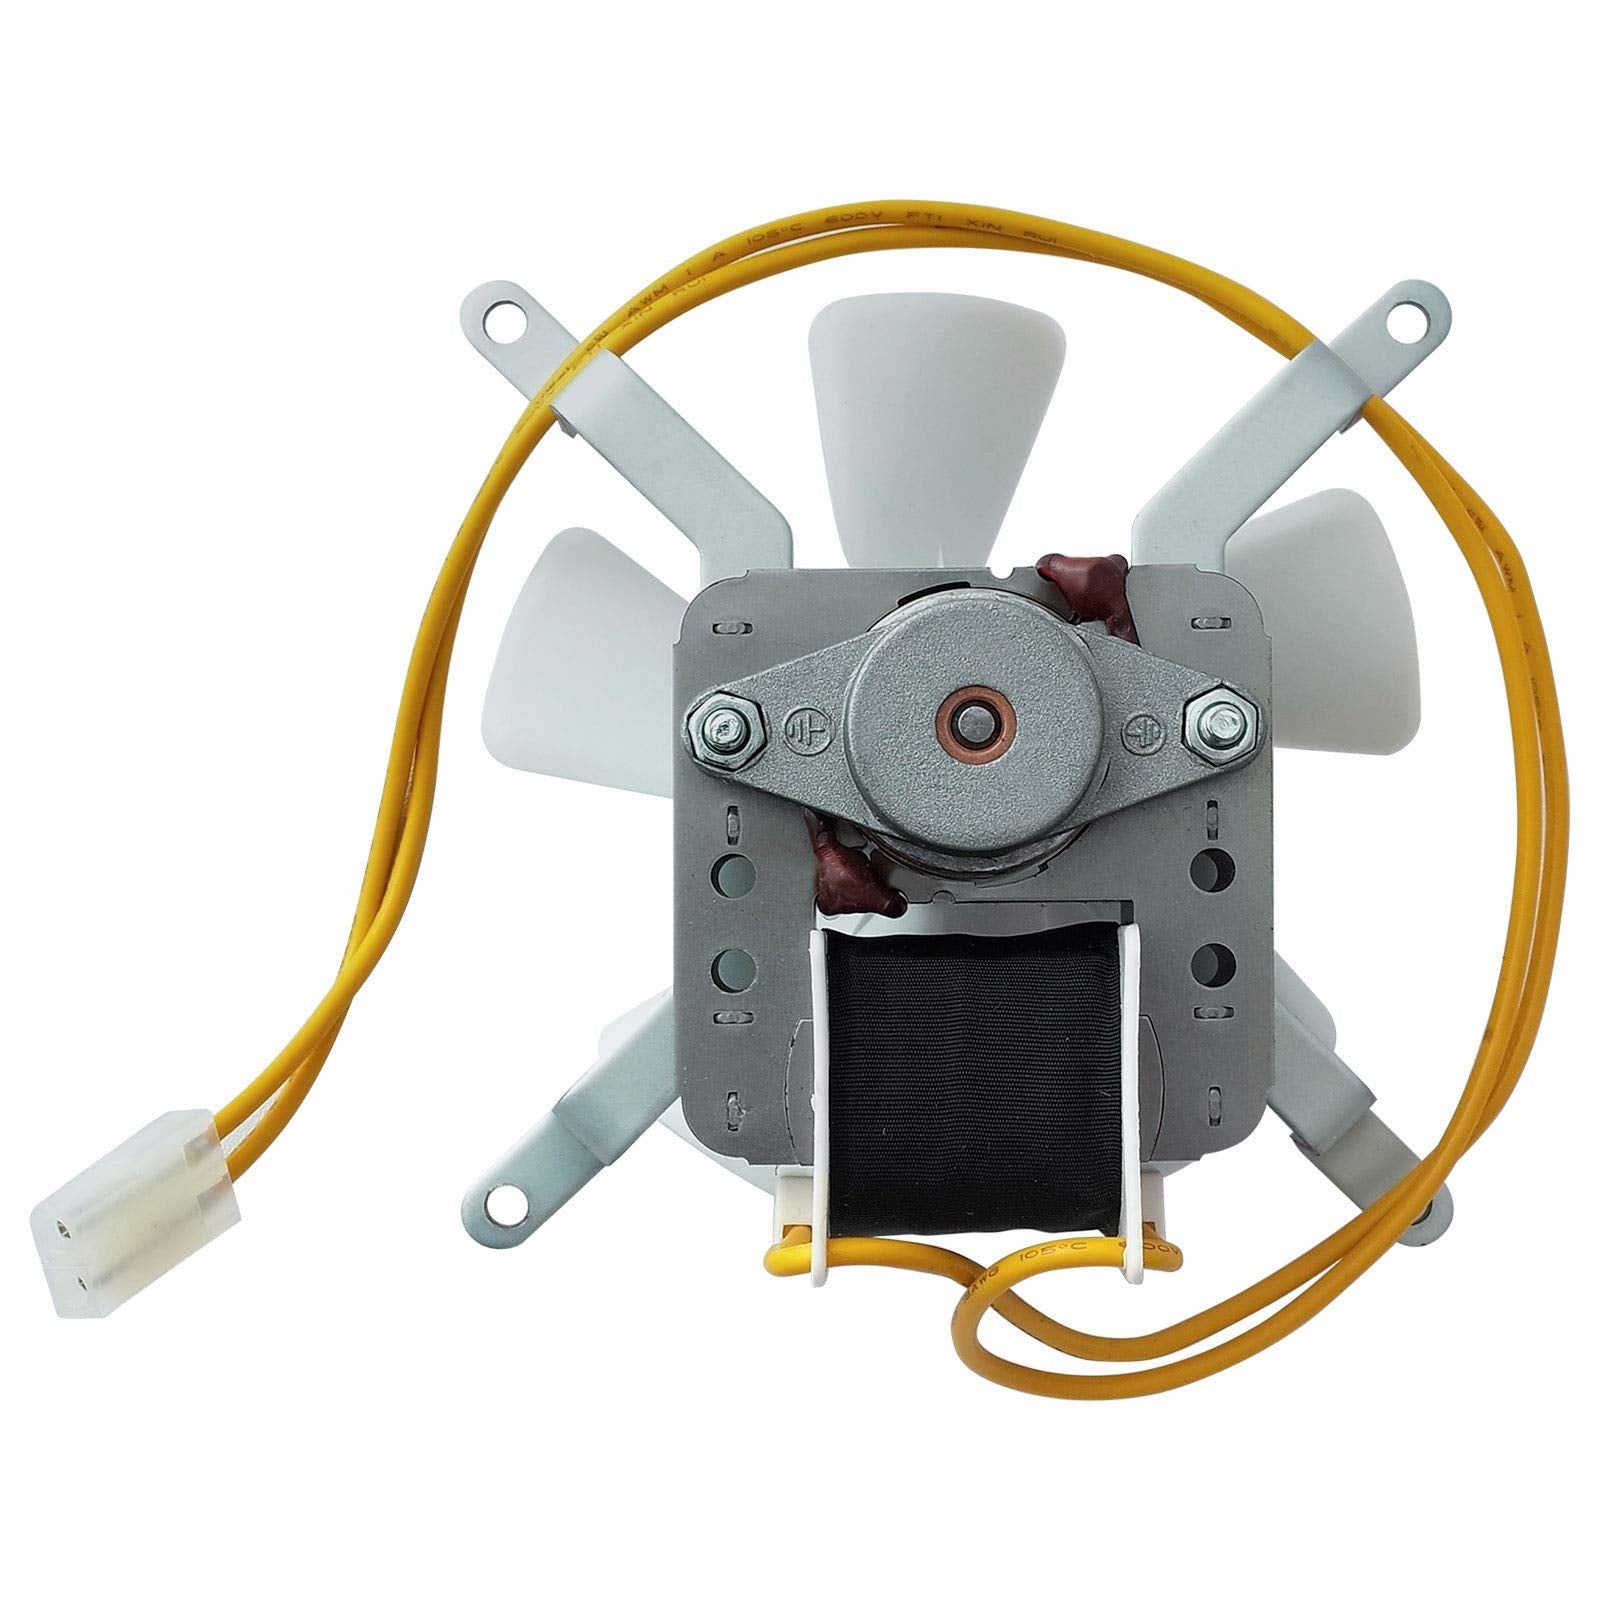 Replacement Fan Motor for Pit Boss & Traeger Pellet Grill Parts, Also Compatible with Camp Chef & Z Grills Smoker Induction Fan Kit